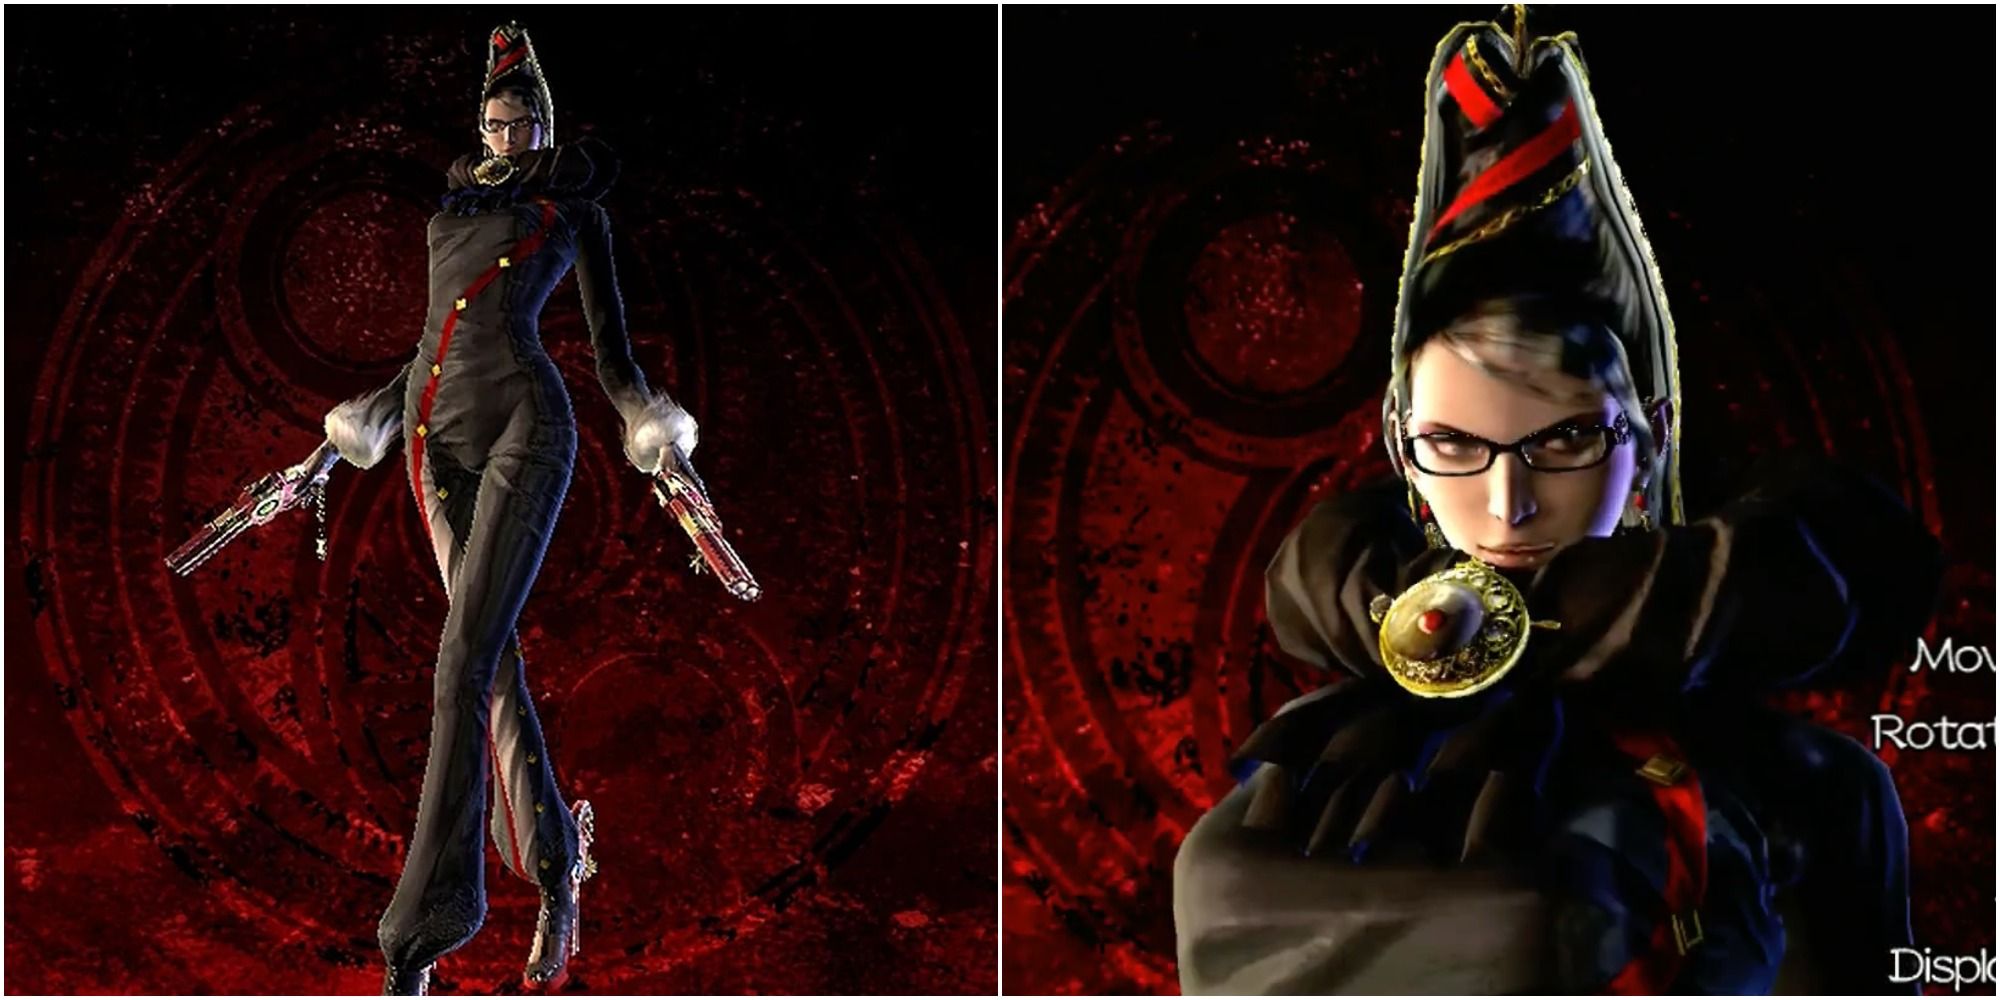 d'Arc costume outfit in Bayonetta 